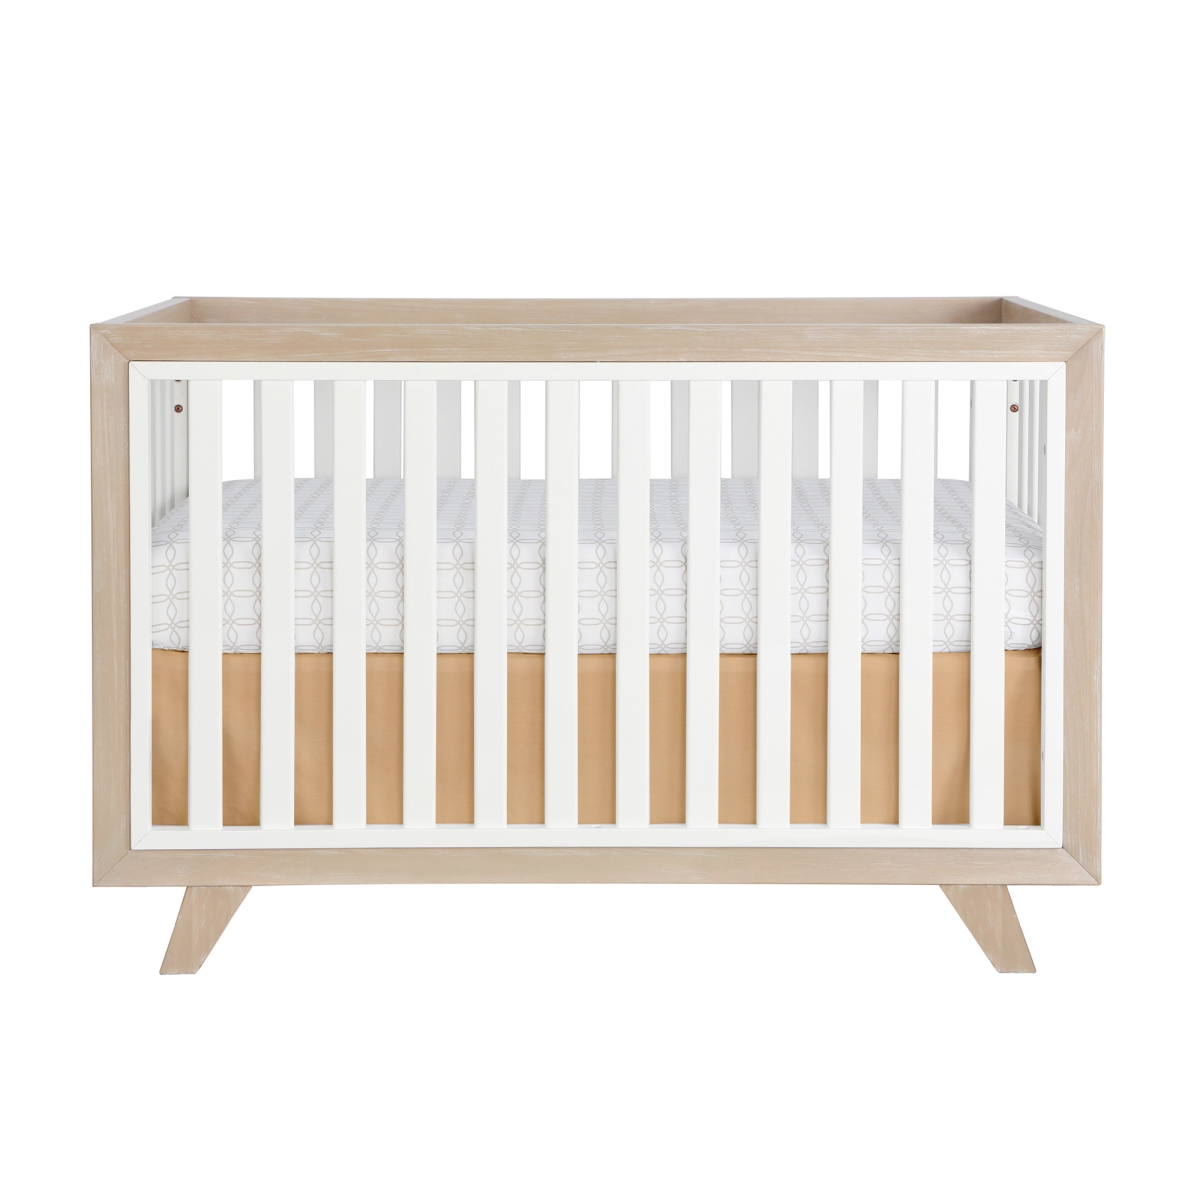 Picture of Second Story Home  268-174-0123 Wooster Two Tone Crib  Almond &amp; White